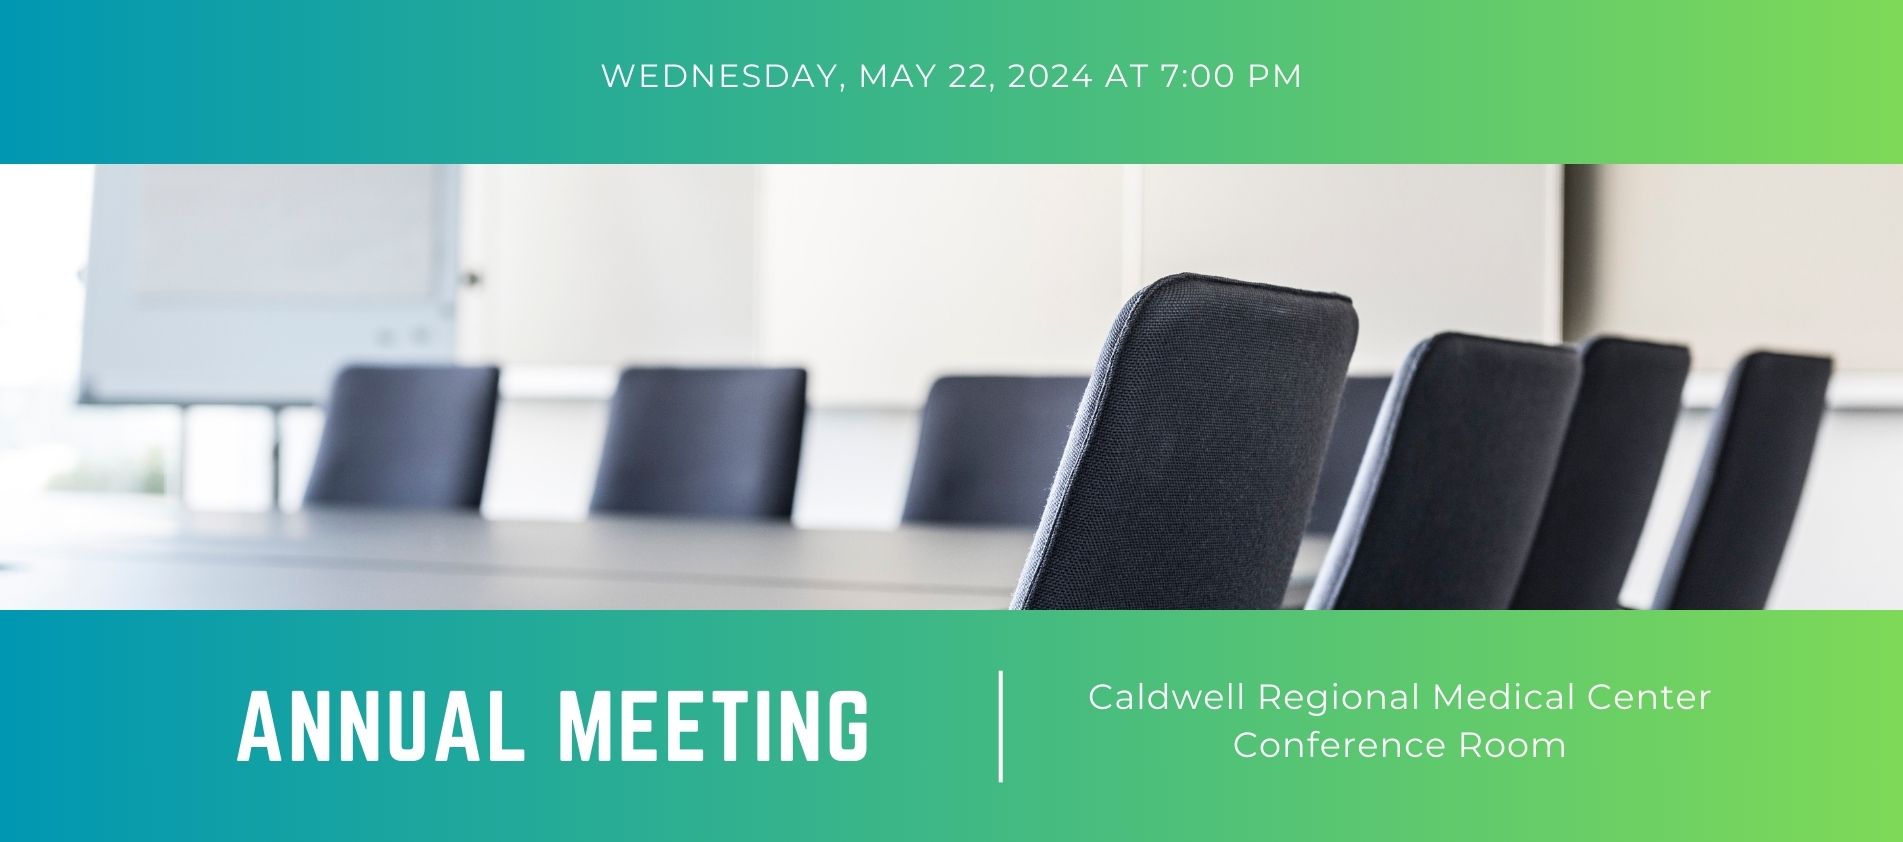 ANNUAl meeting
Wednesday May 22, 2024
Caldwell Regional Medical Center Conference Room